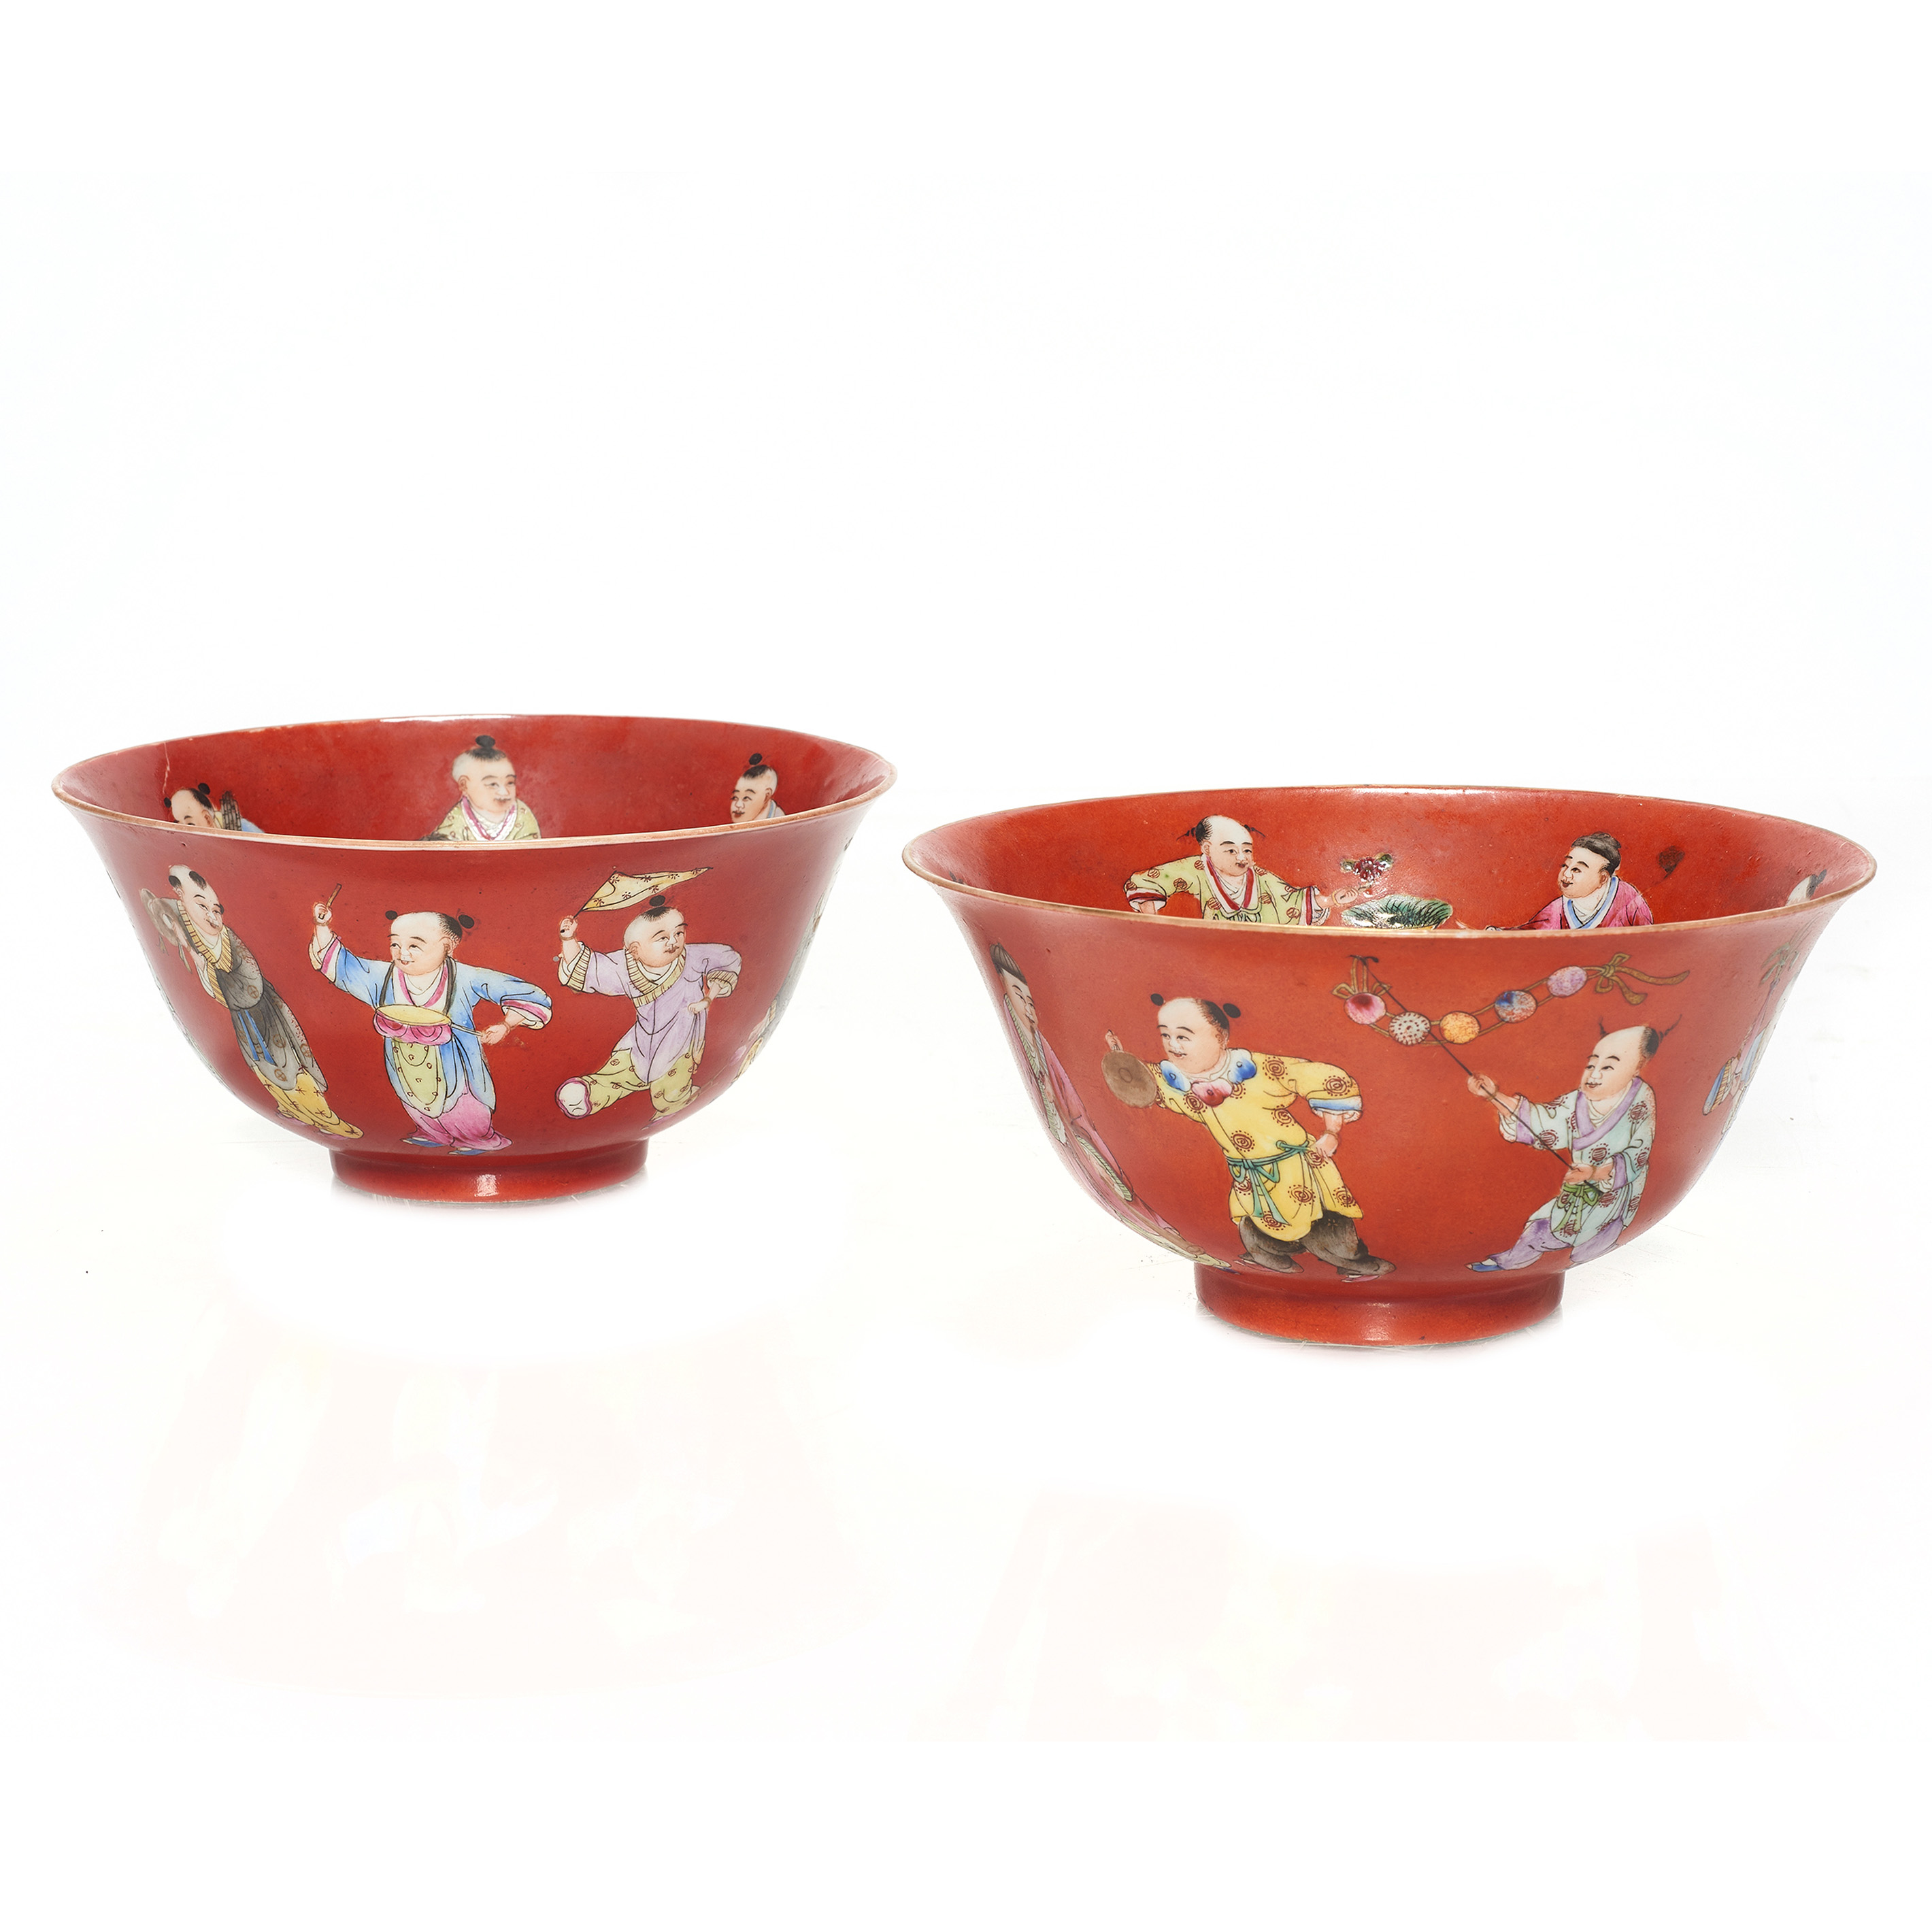 PAIR OF CHINESE FAMILLE ROSE BOWLS 2d1d5d